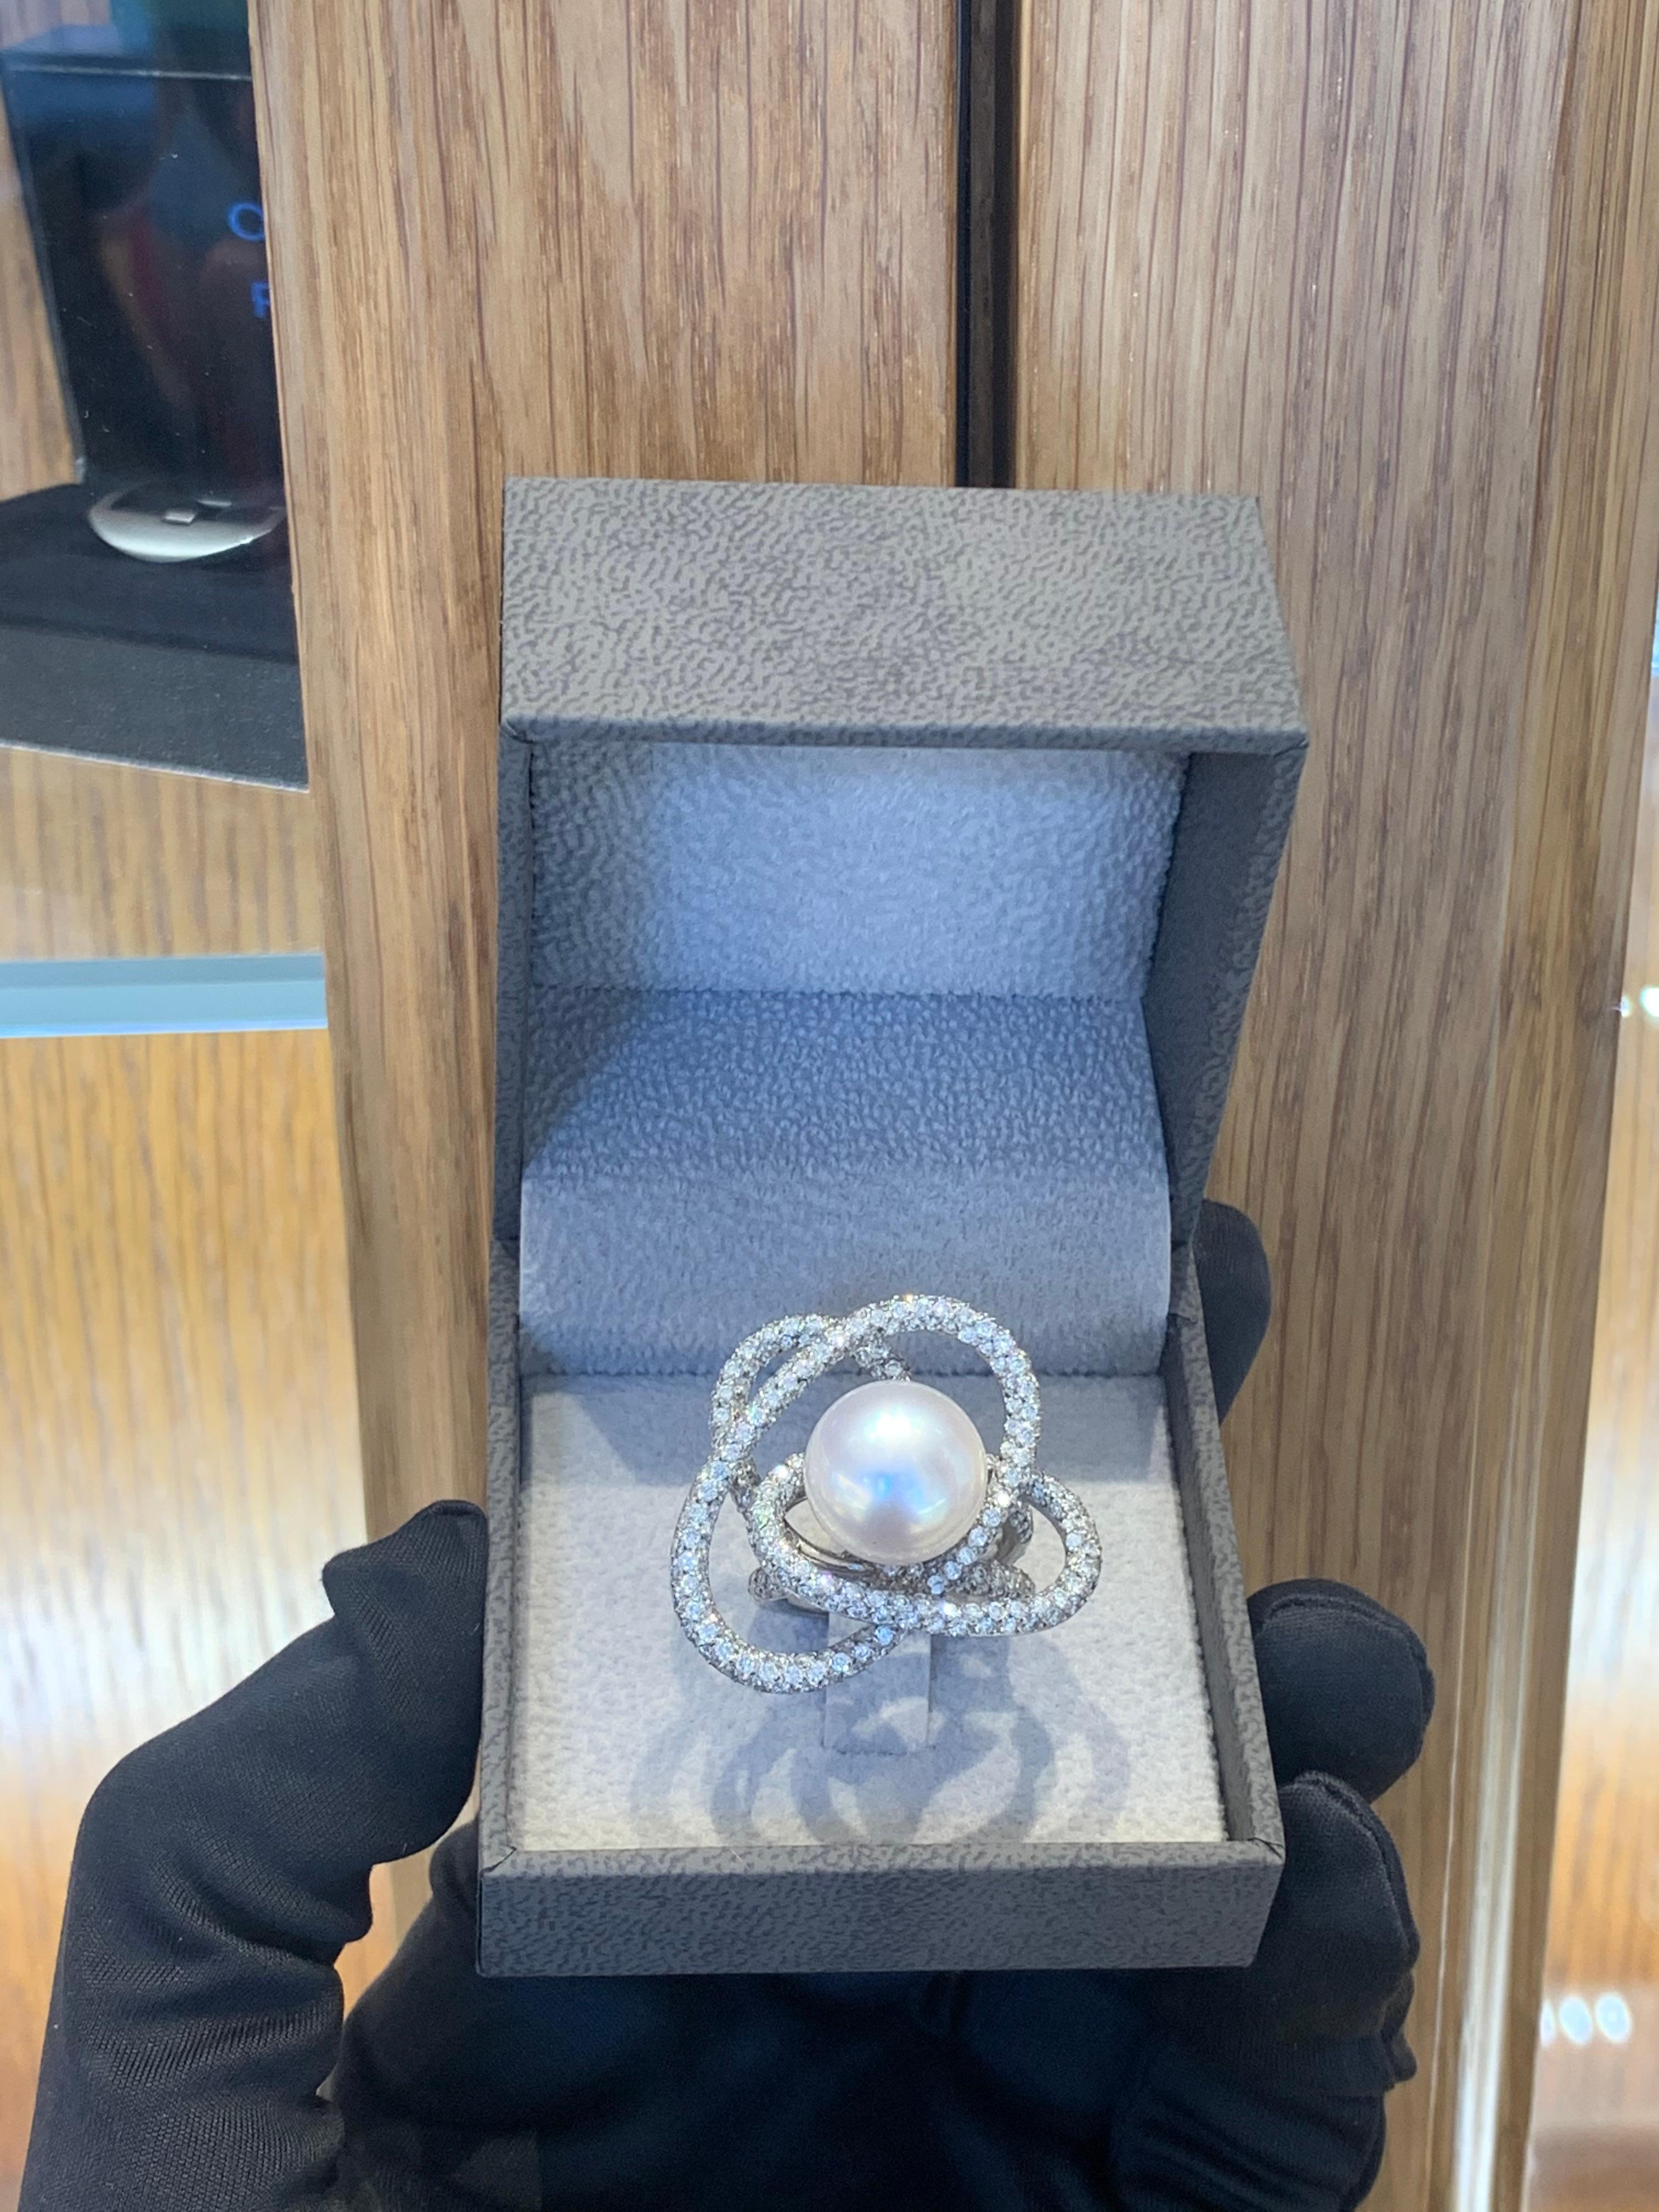 18k Gold 15mm White Pearl & 3.0 Carats Diamond Cocktail Ring For Sale 2